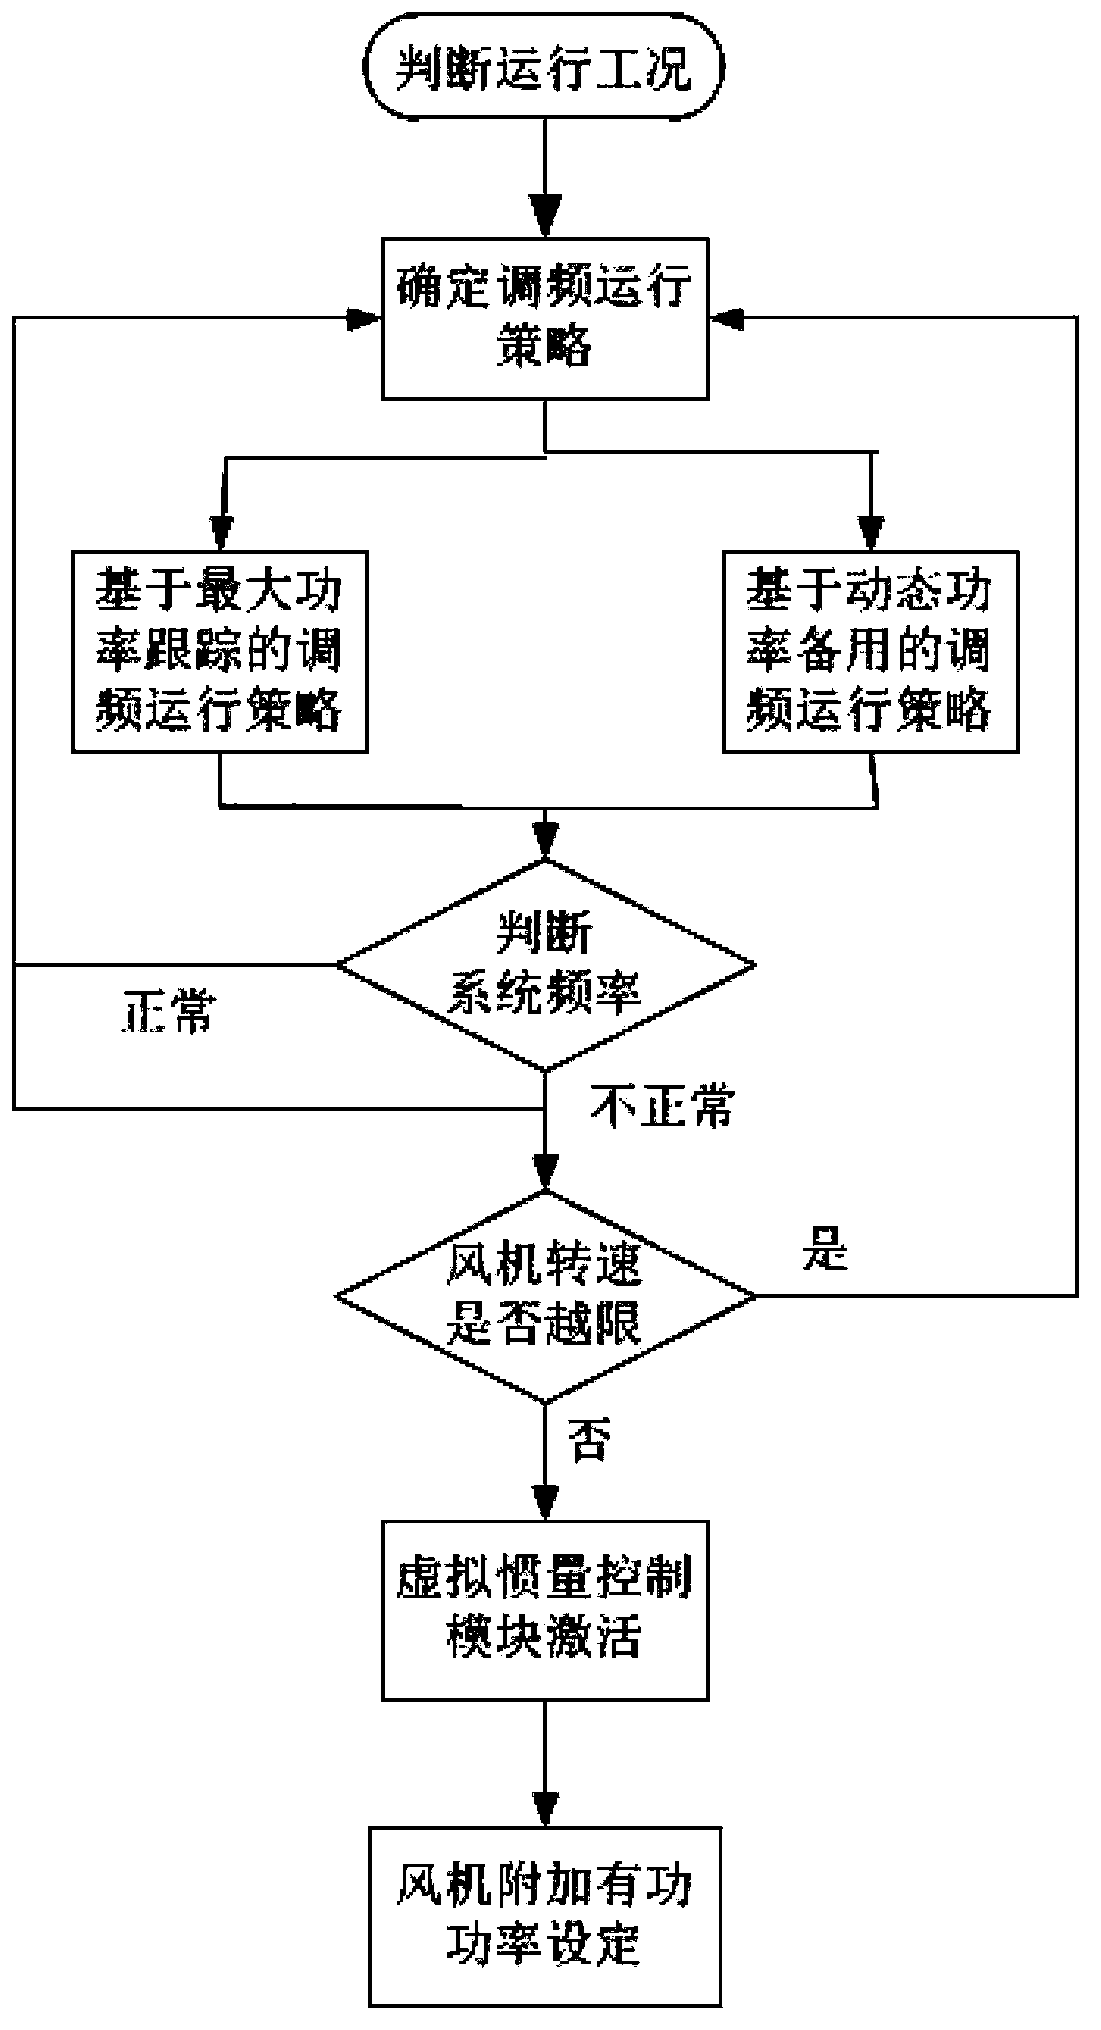 Variable speed wind turbine generator frequency control method based on dynamic standby power